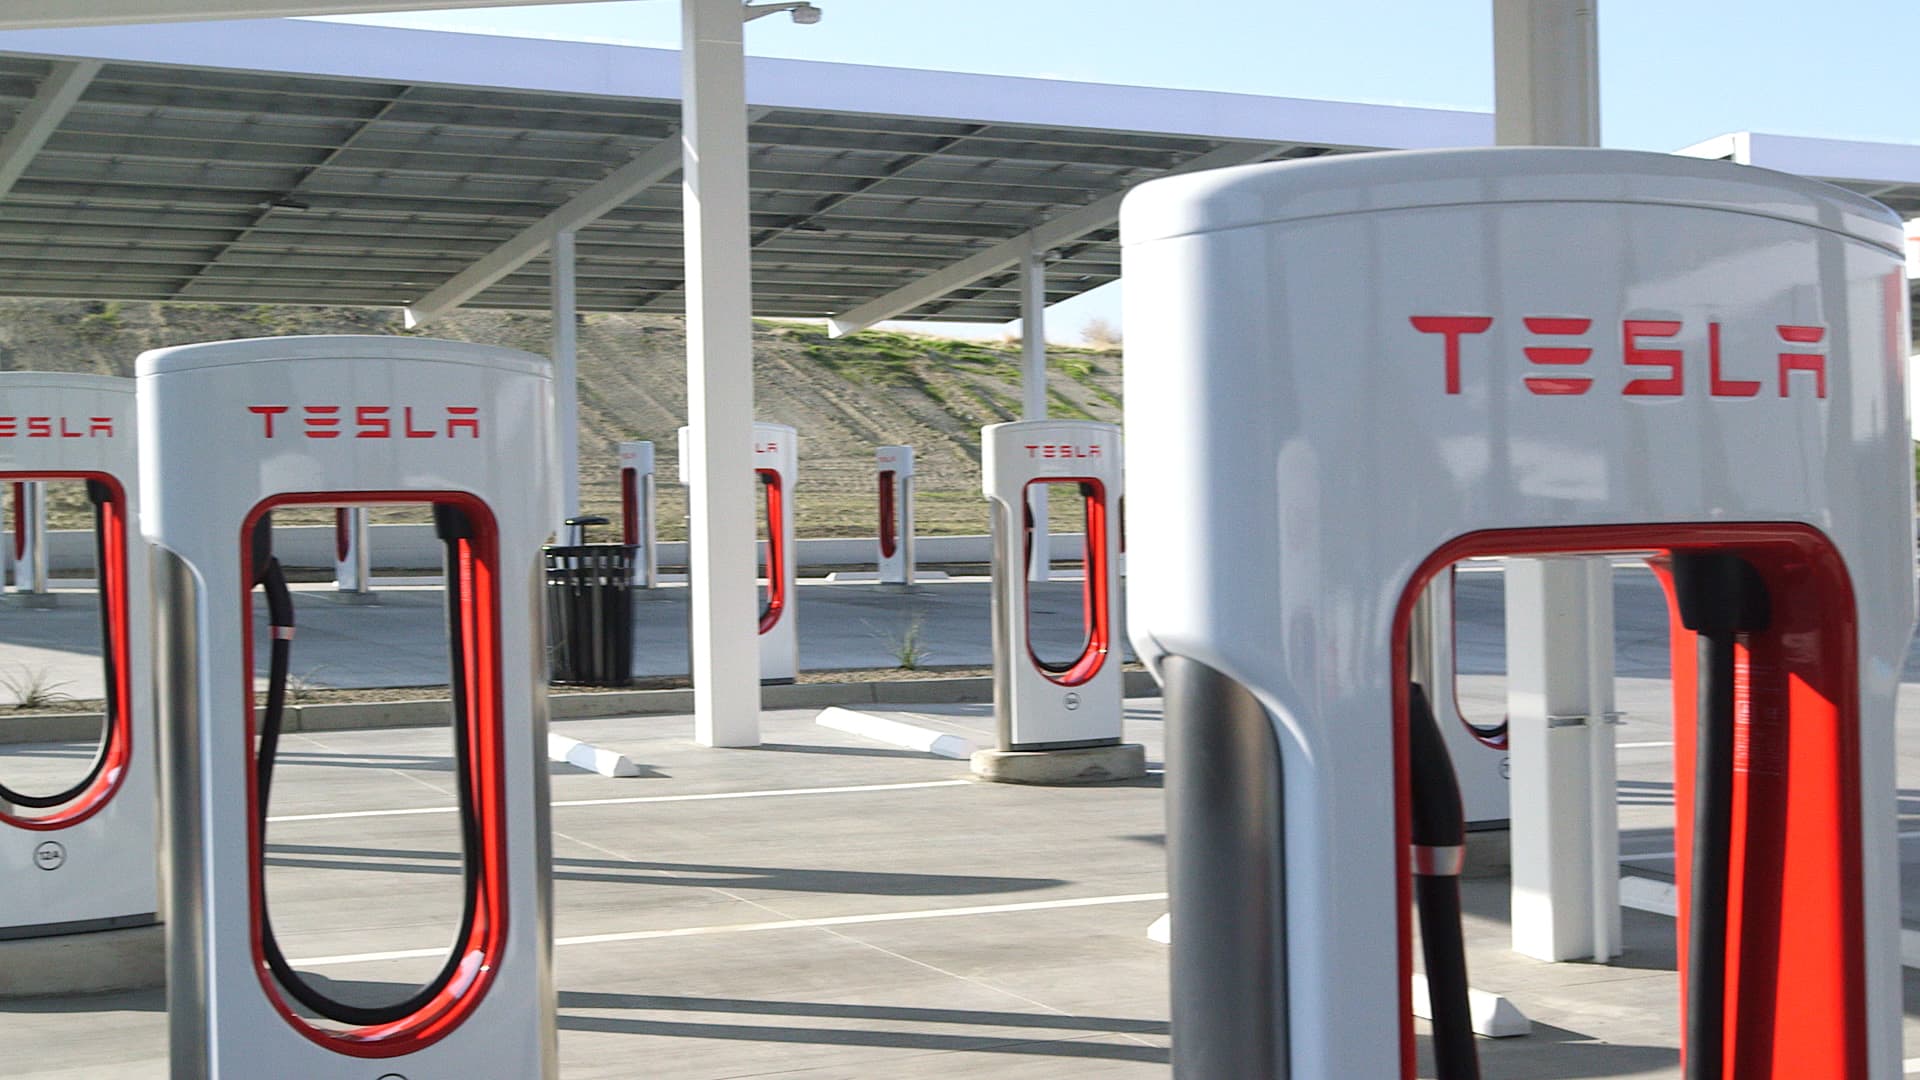 Elon Musk says Tesla will open Superchargers to other cars in 2021